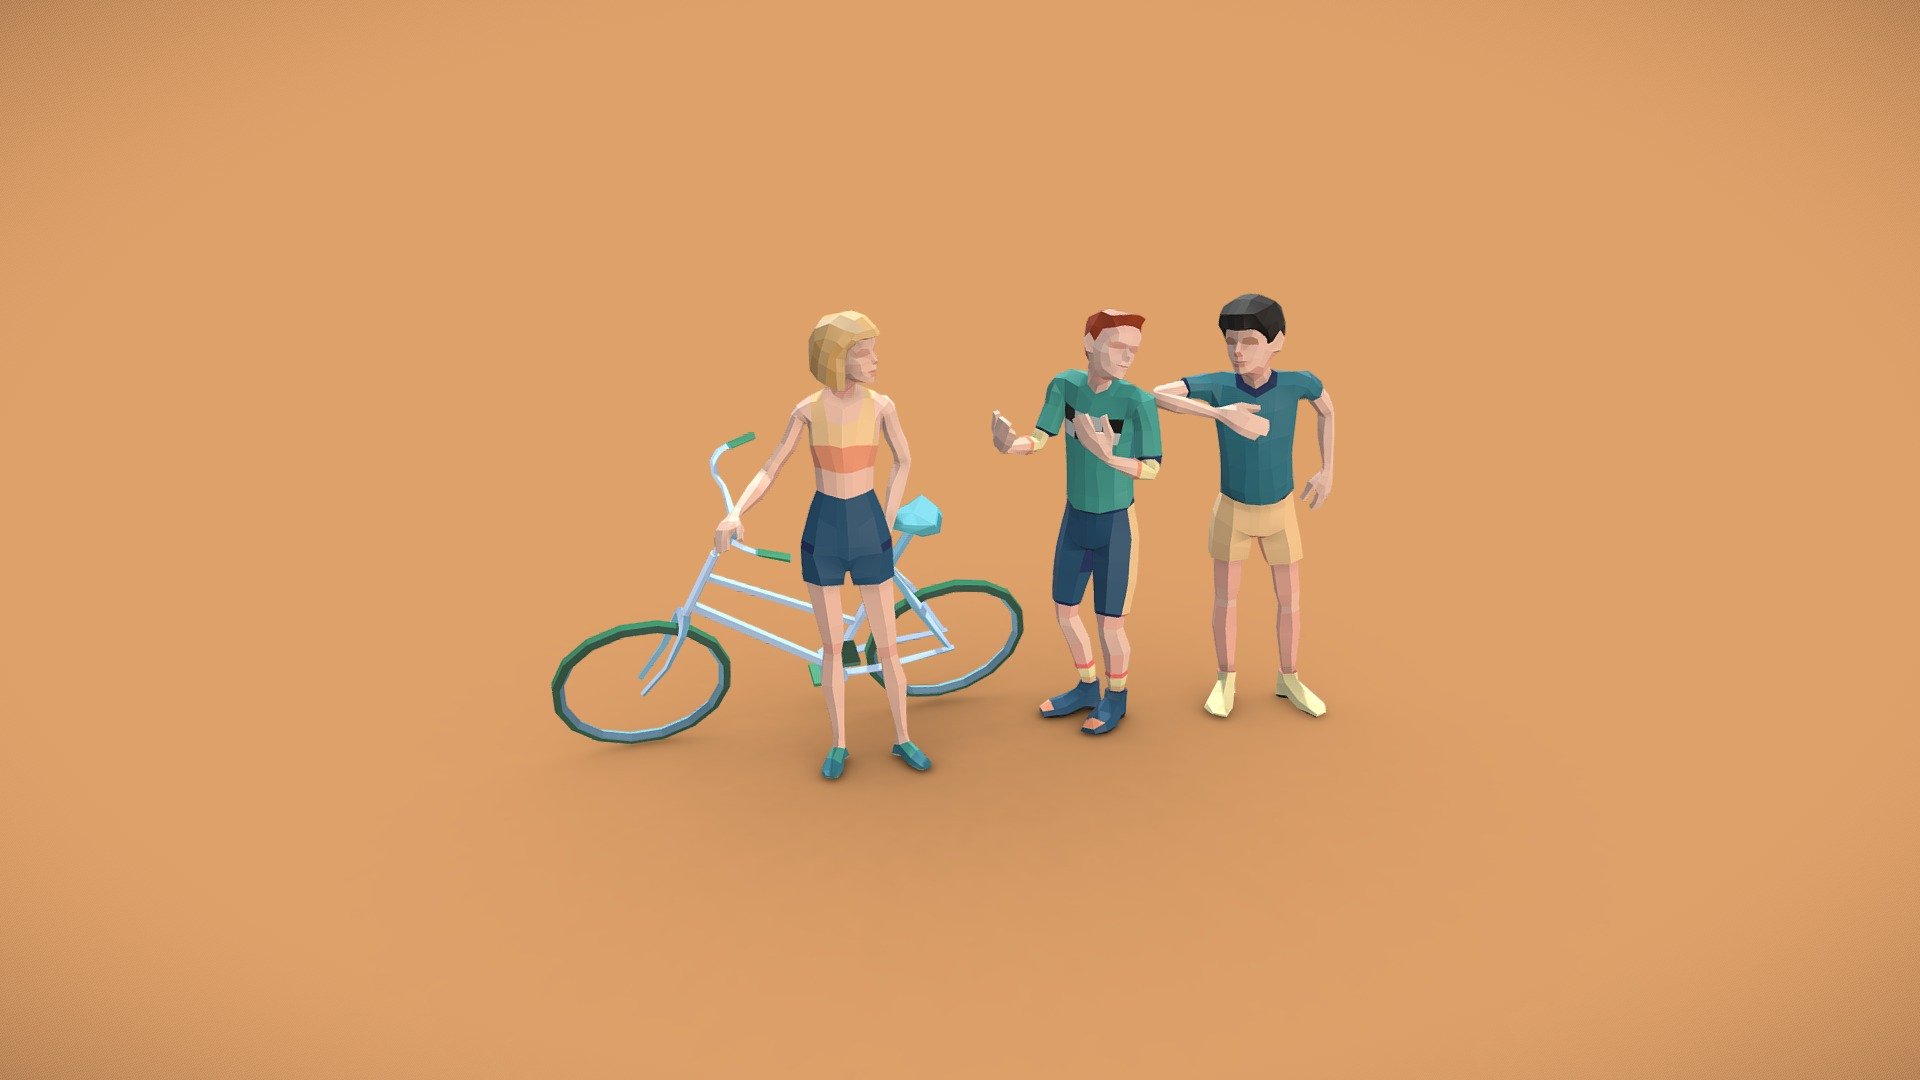 Free Sample from the  main product: Low-Poly City Life Static 3D Character Sets

See all texture variants: Textures Showcase&amp;amp;Benchmark




Low-poly design for optimized performance. 

Non-rigged, drag and drop, easy-to-use static meshes
 - Static Set Low-Poly 3D Characters "Tell Her" - Download Free 3D model by Denys Almaral (@denysalmaral) 3d model